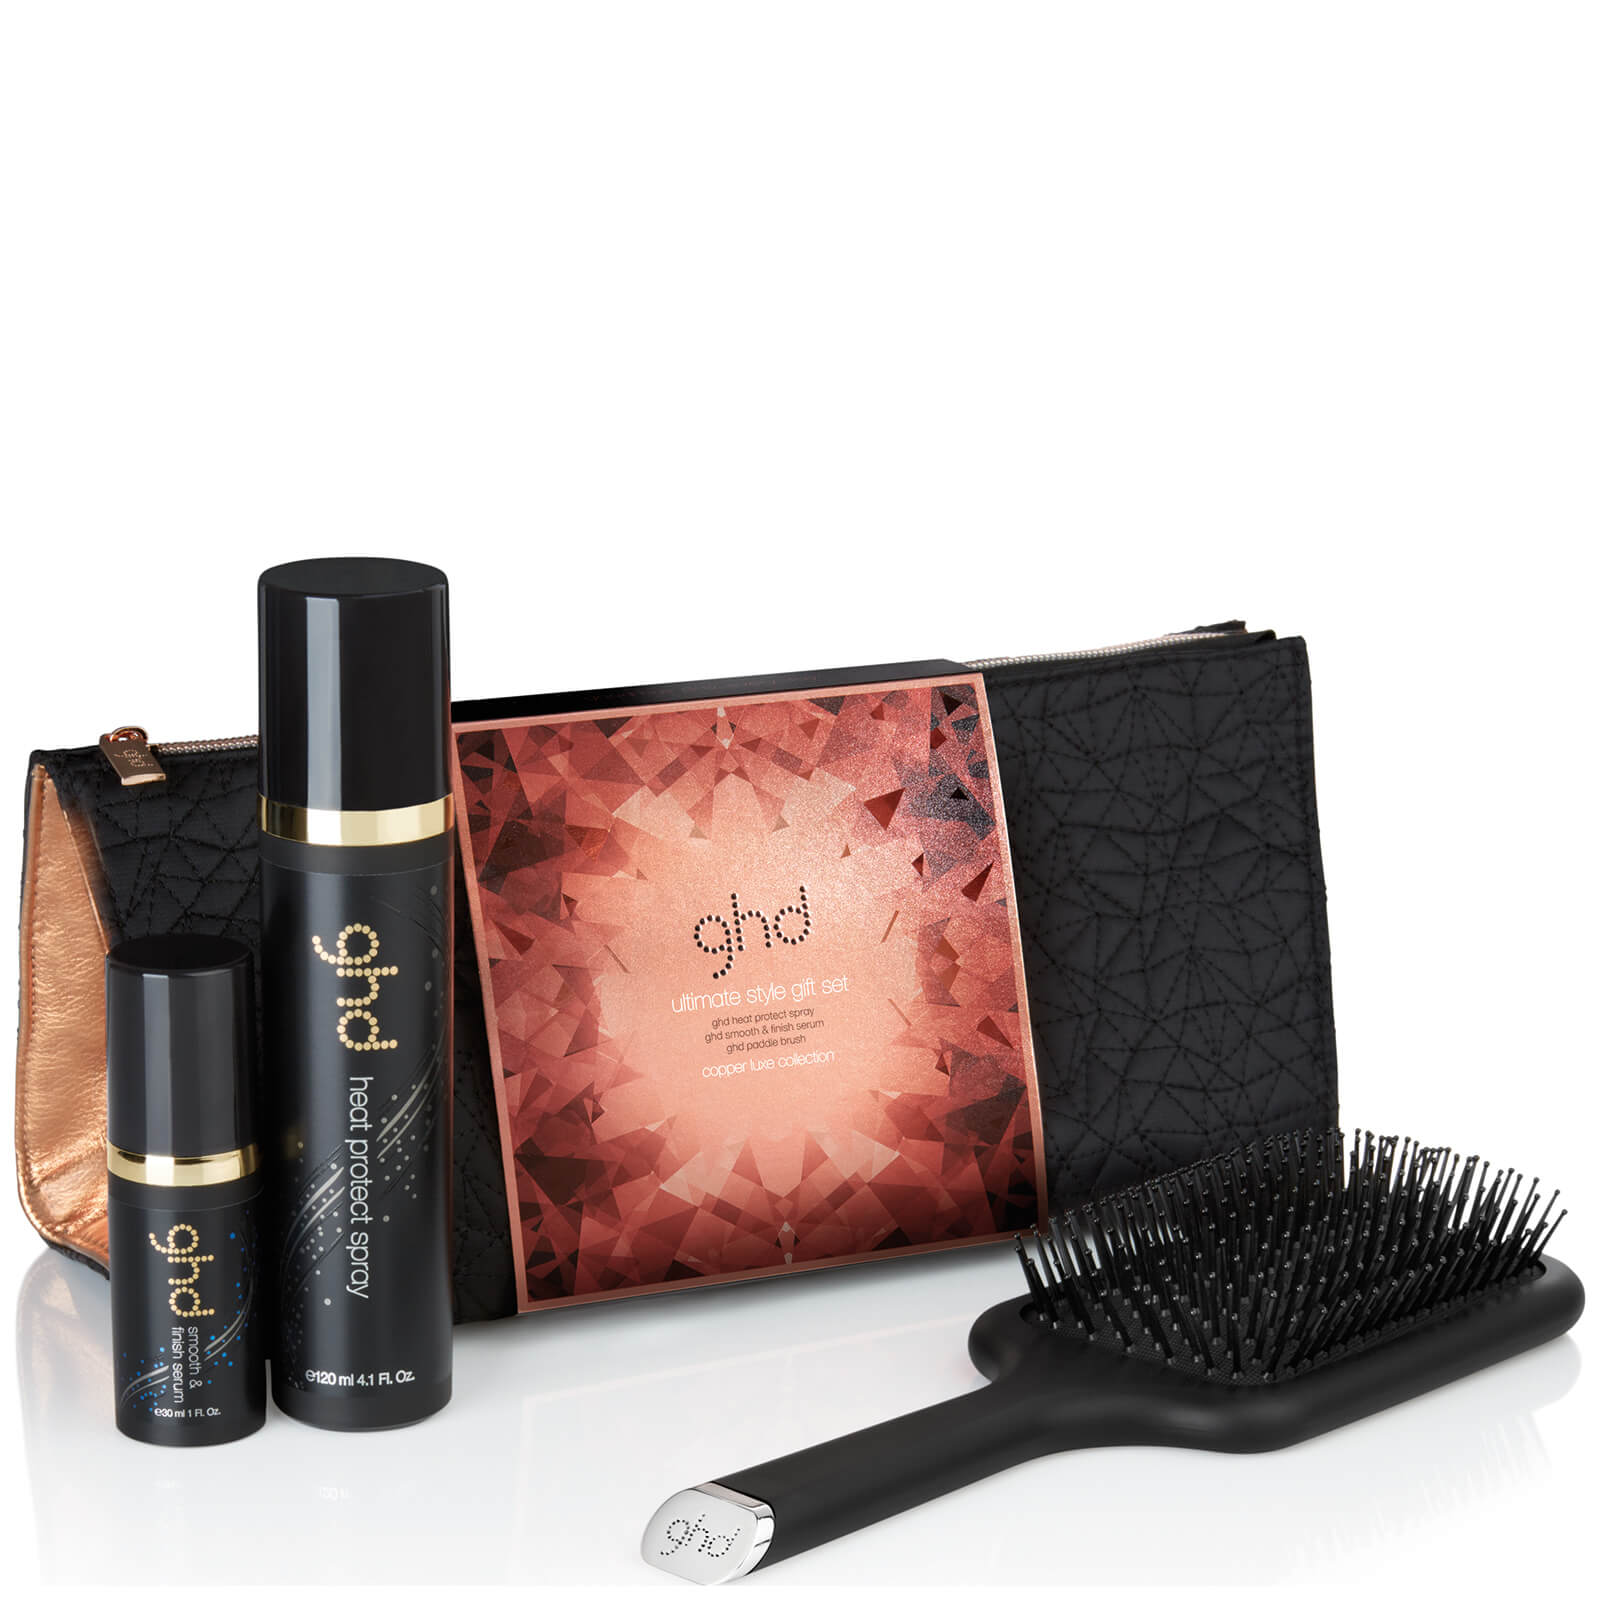 ghd Protect & Finish Set